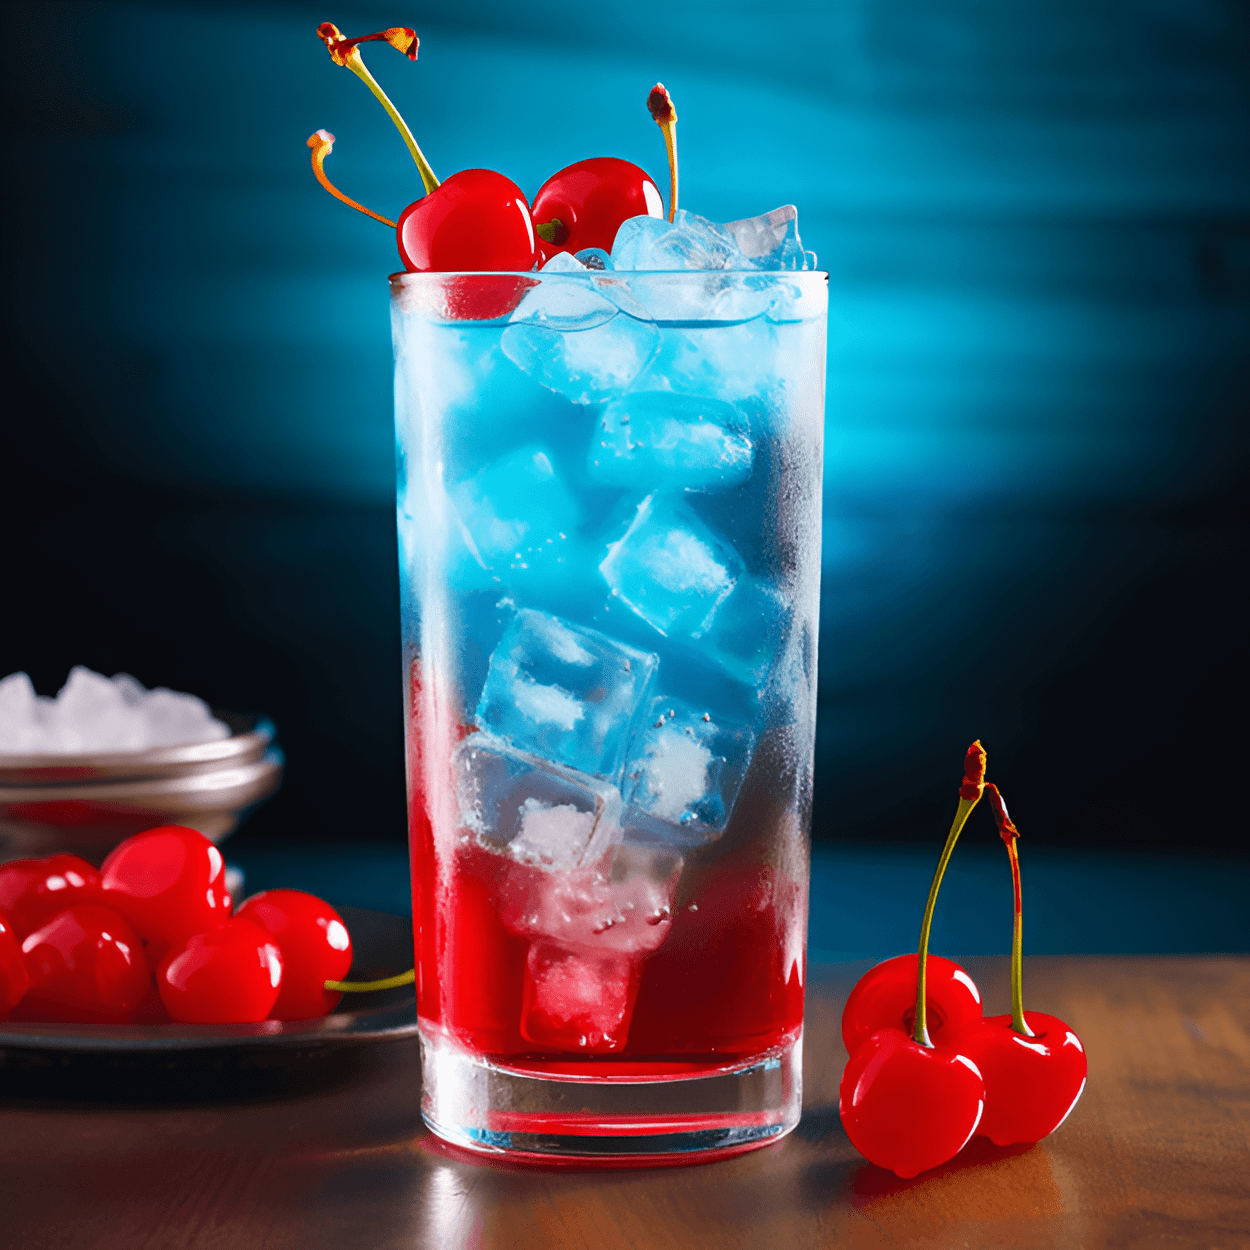 Superman Cocktail Recipe - The Superman Cocktail is a sweet and fruity concoction. It has a tropical taste with hints of coconut and pineapple. The blue curacao gives it a citrusy edge, balancing out the sweetness.